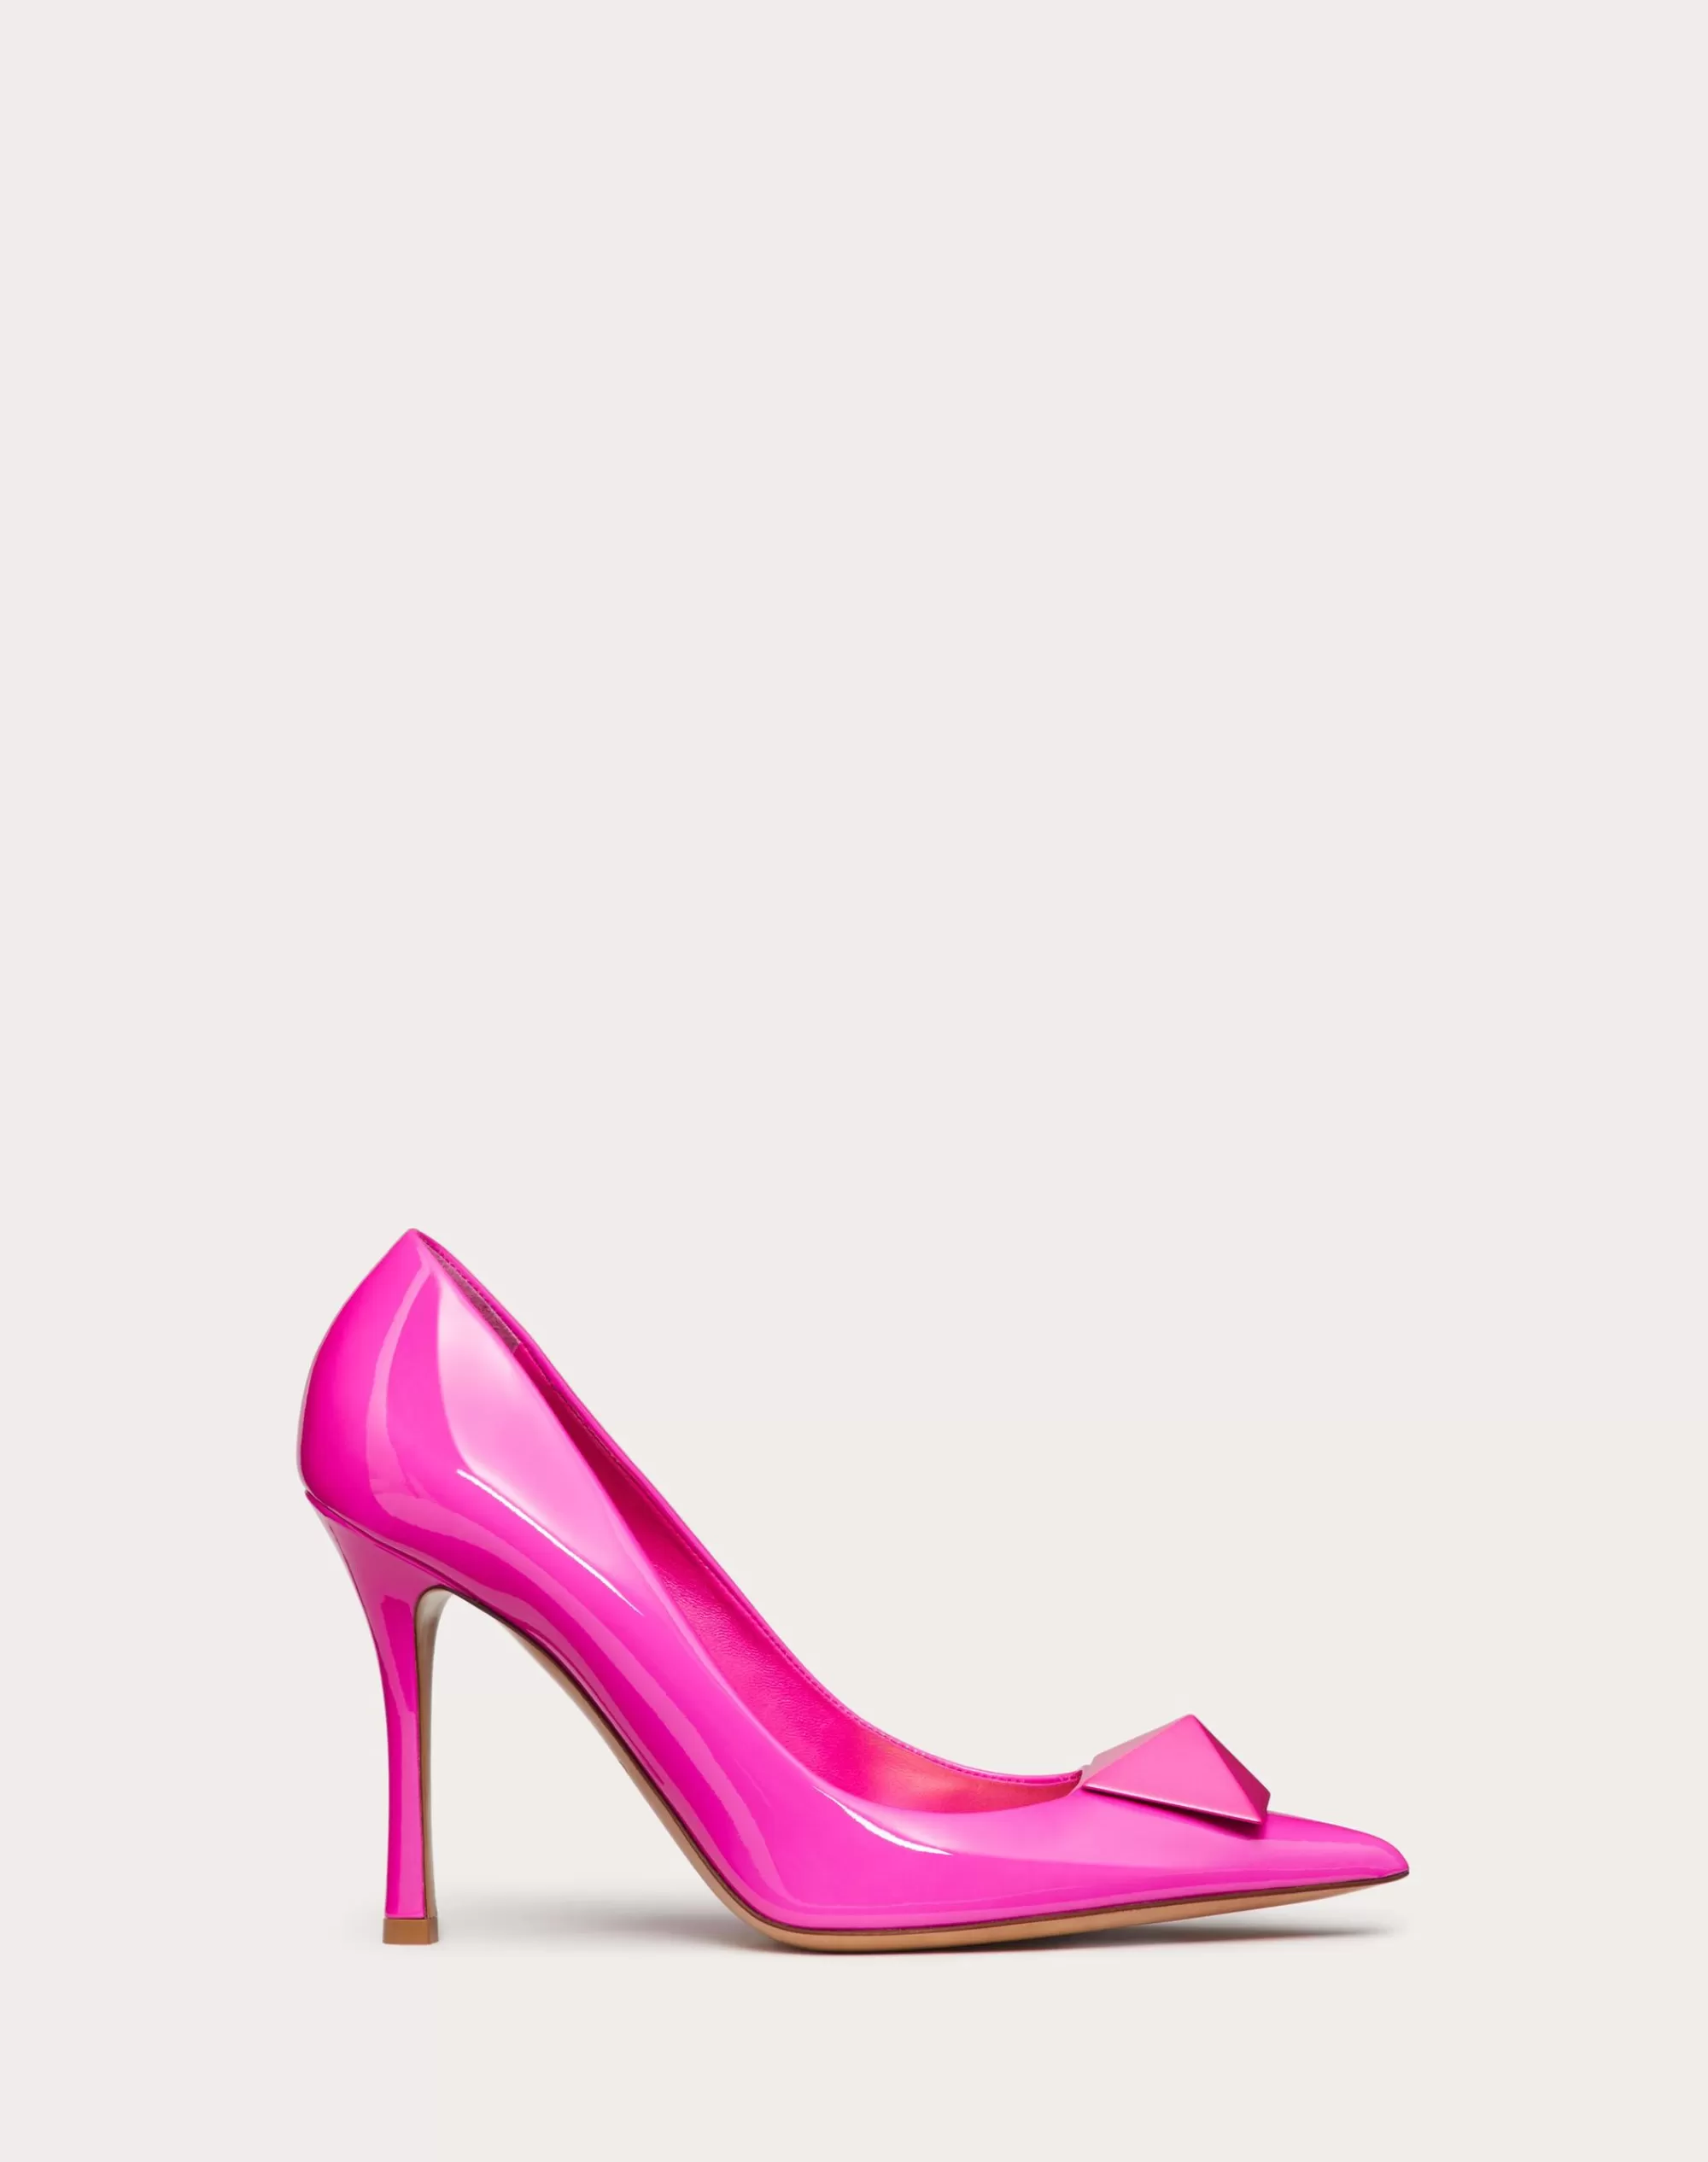 Valentino ONE STUD PATENT LEATHER PUMP WITH MATCHING STUD 100 MM PinkPp Flash Sale